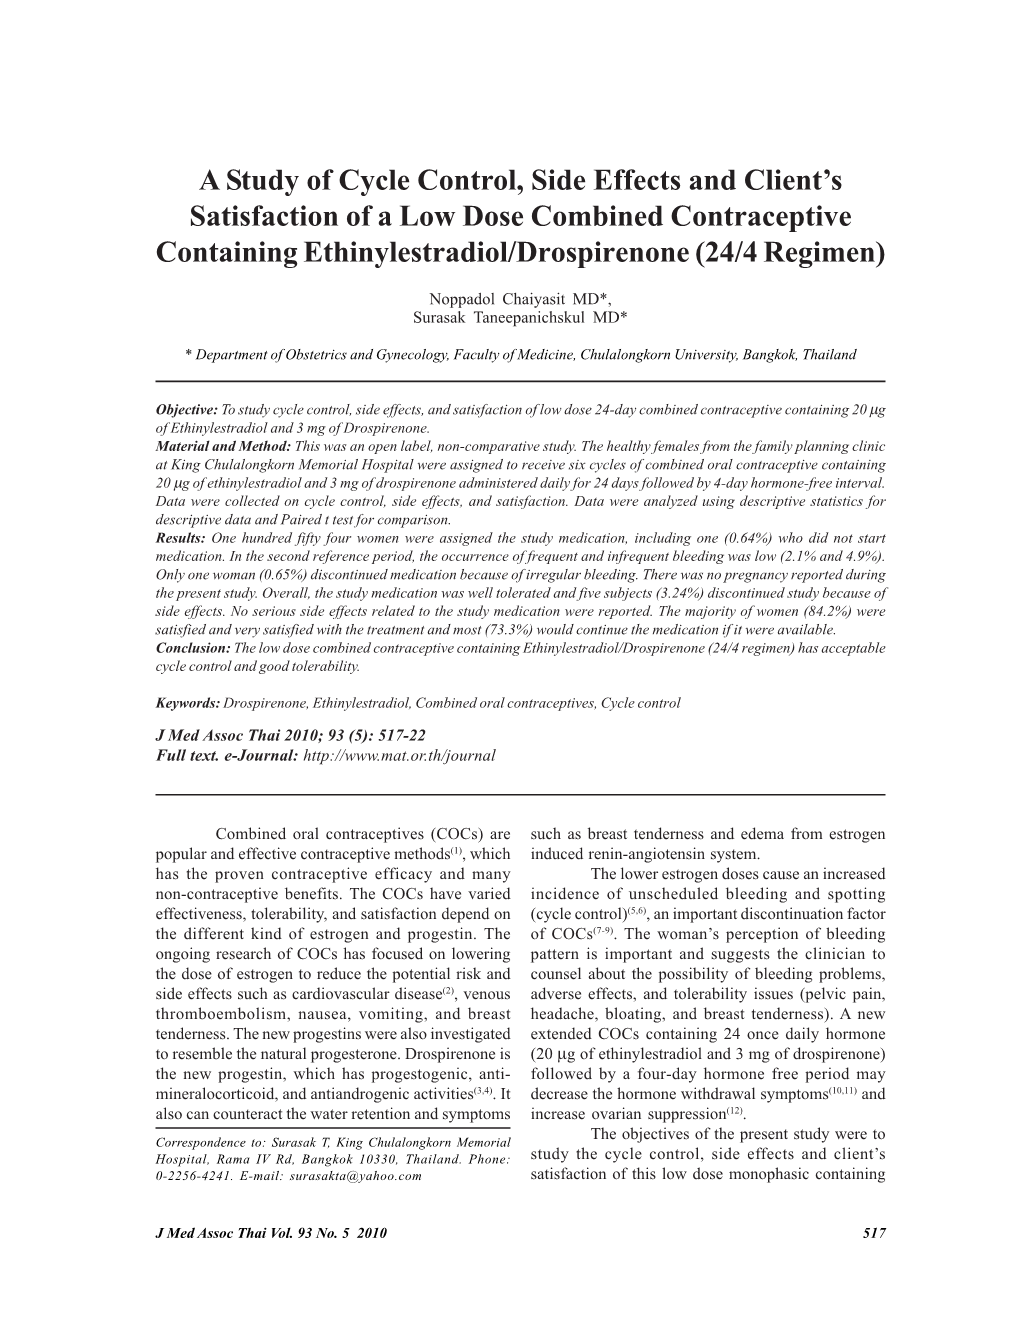 A Study of Cycle Control, Side Effects and Client's Satisfaction of a Low